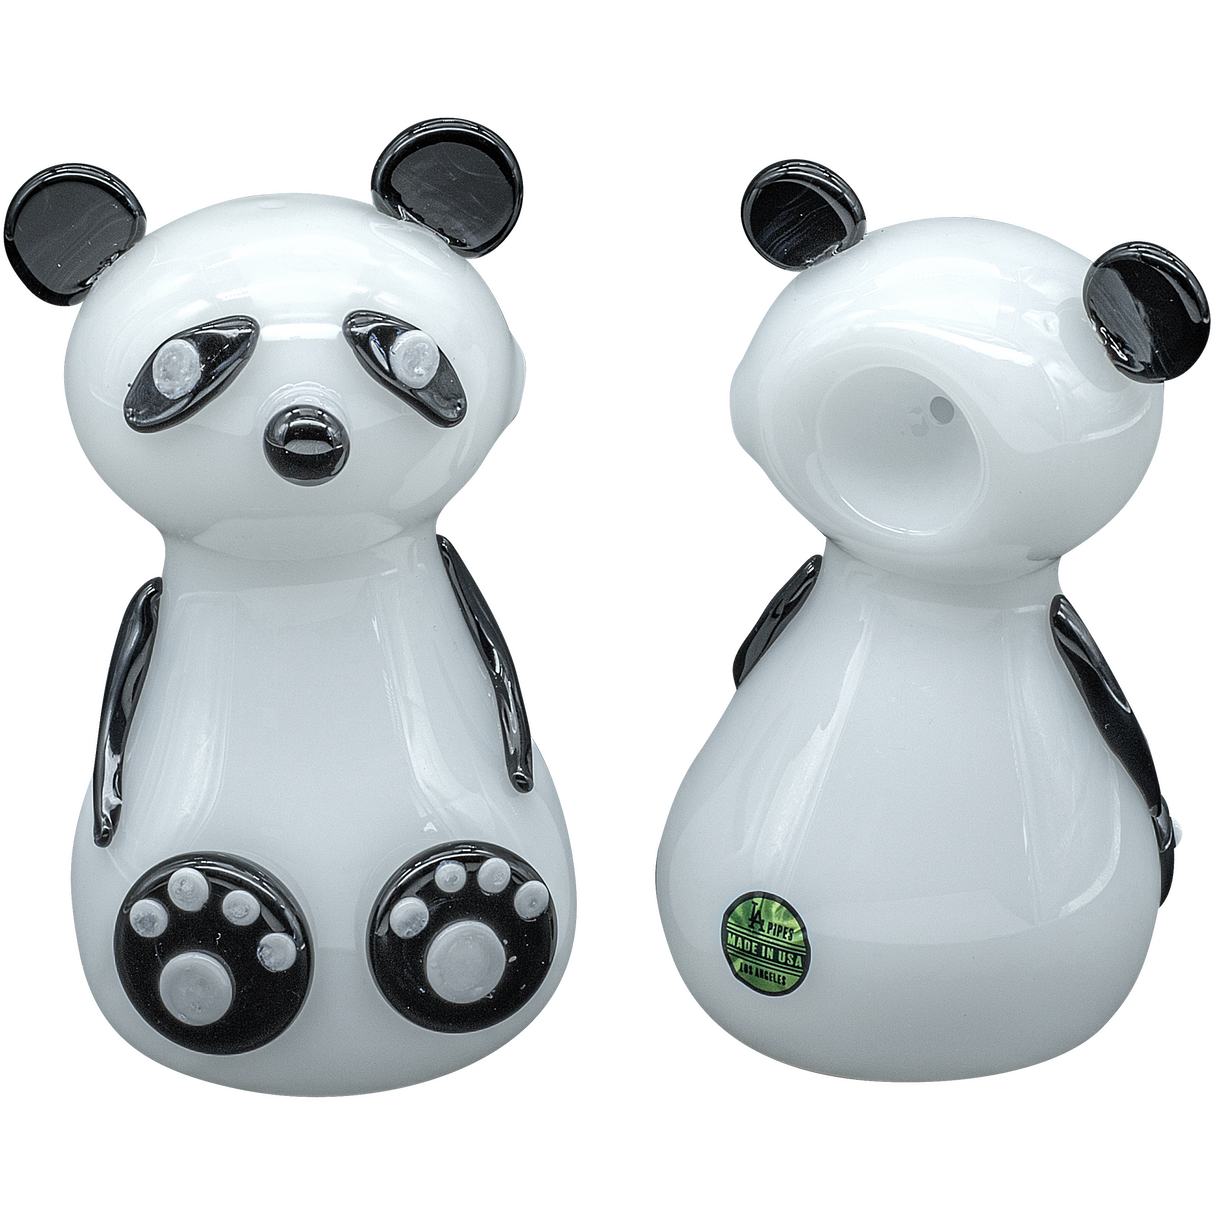 LA Pipes "Bored Panda" Glass Pipe for Dry Herbs, Front and Side View, 4" Borosilicate